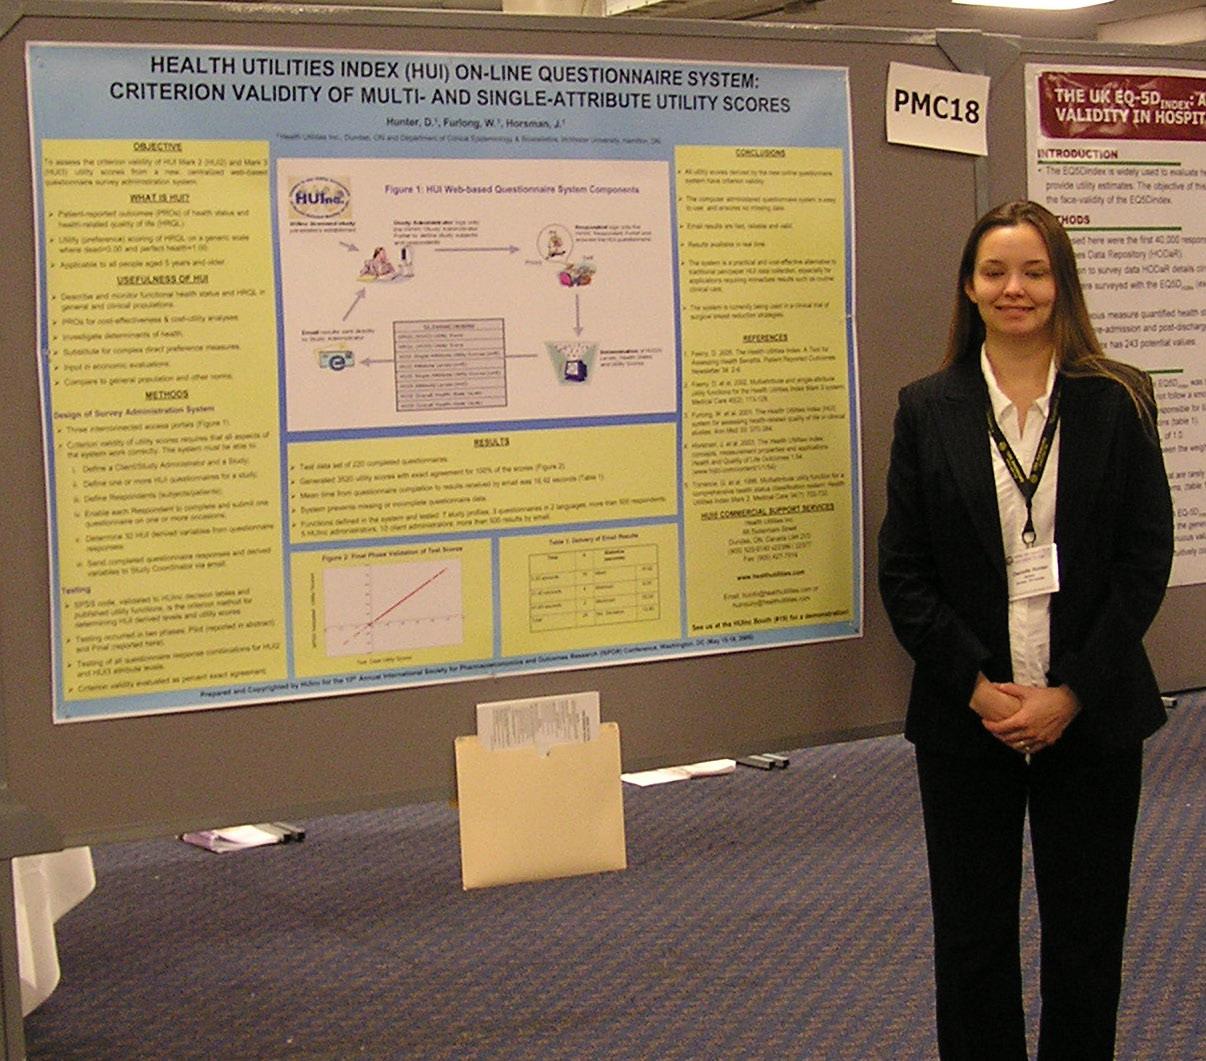 Danielle Hunter and poster at ISPOR2005